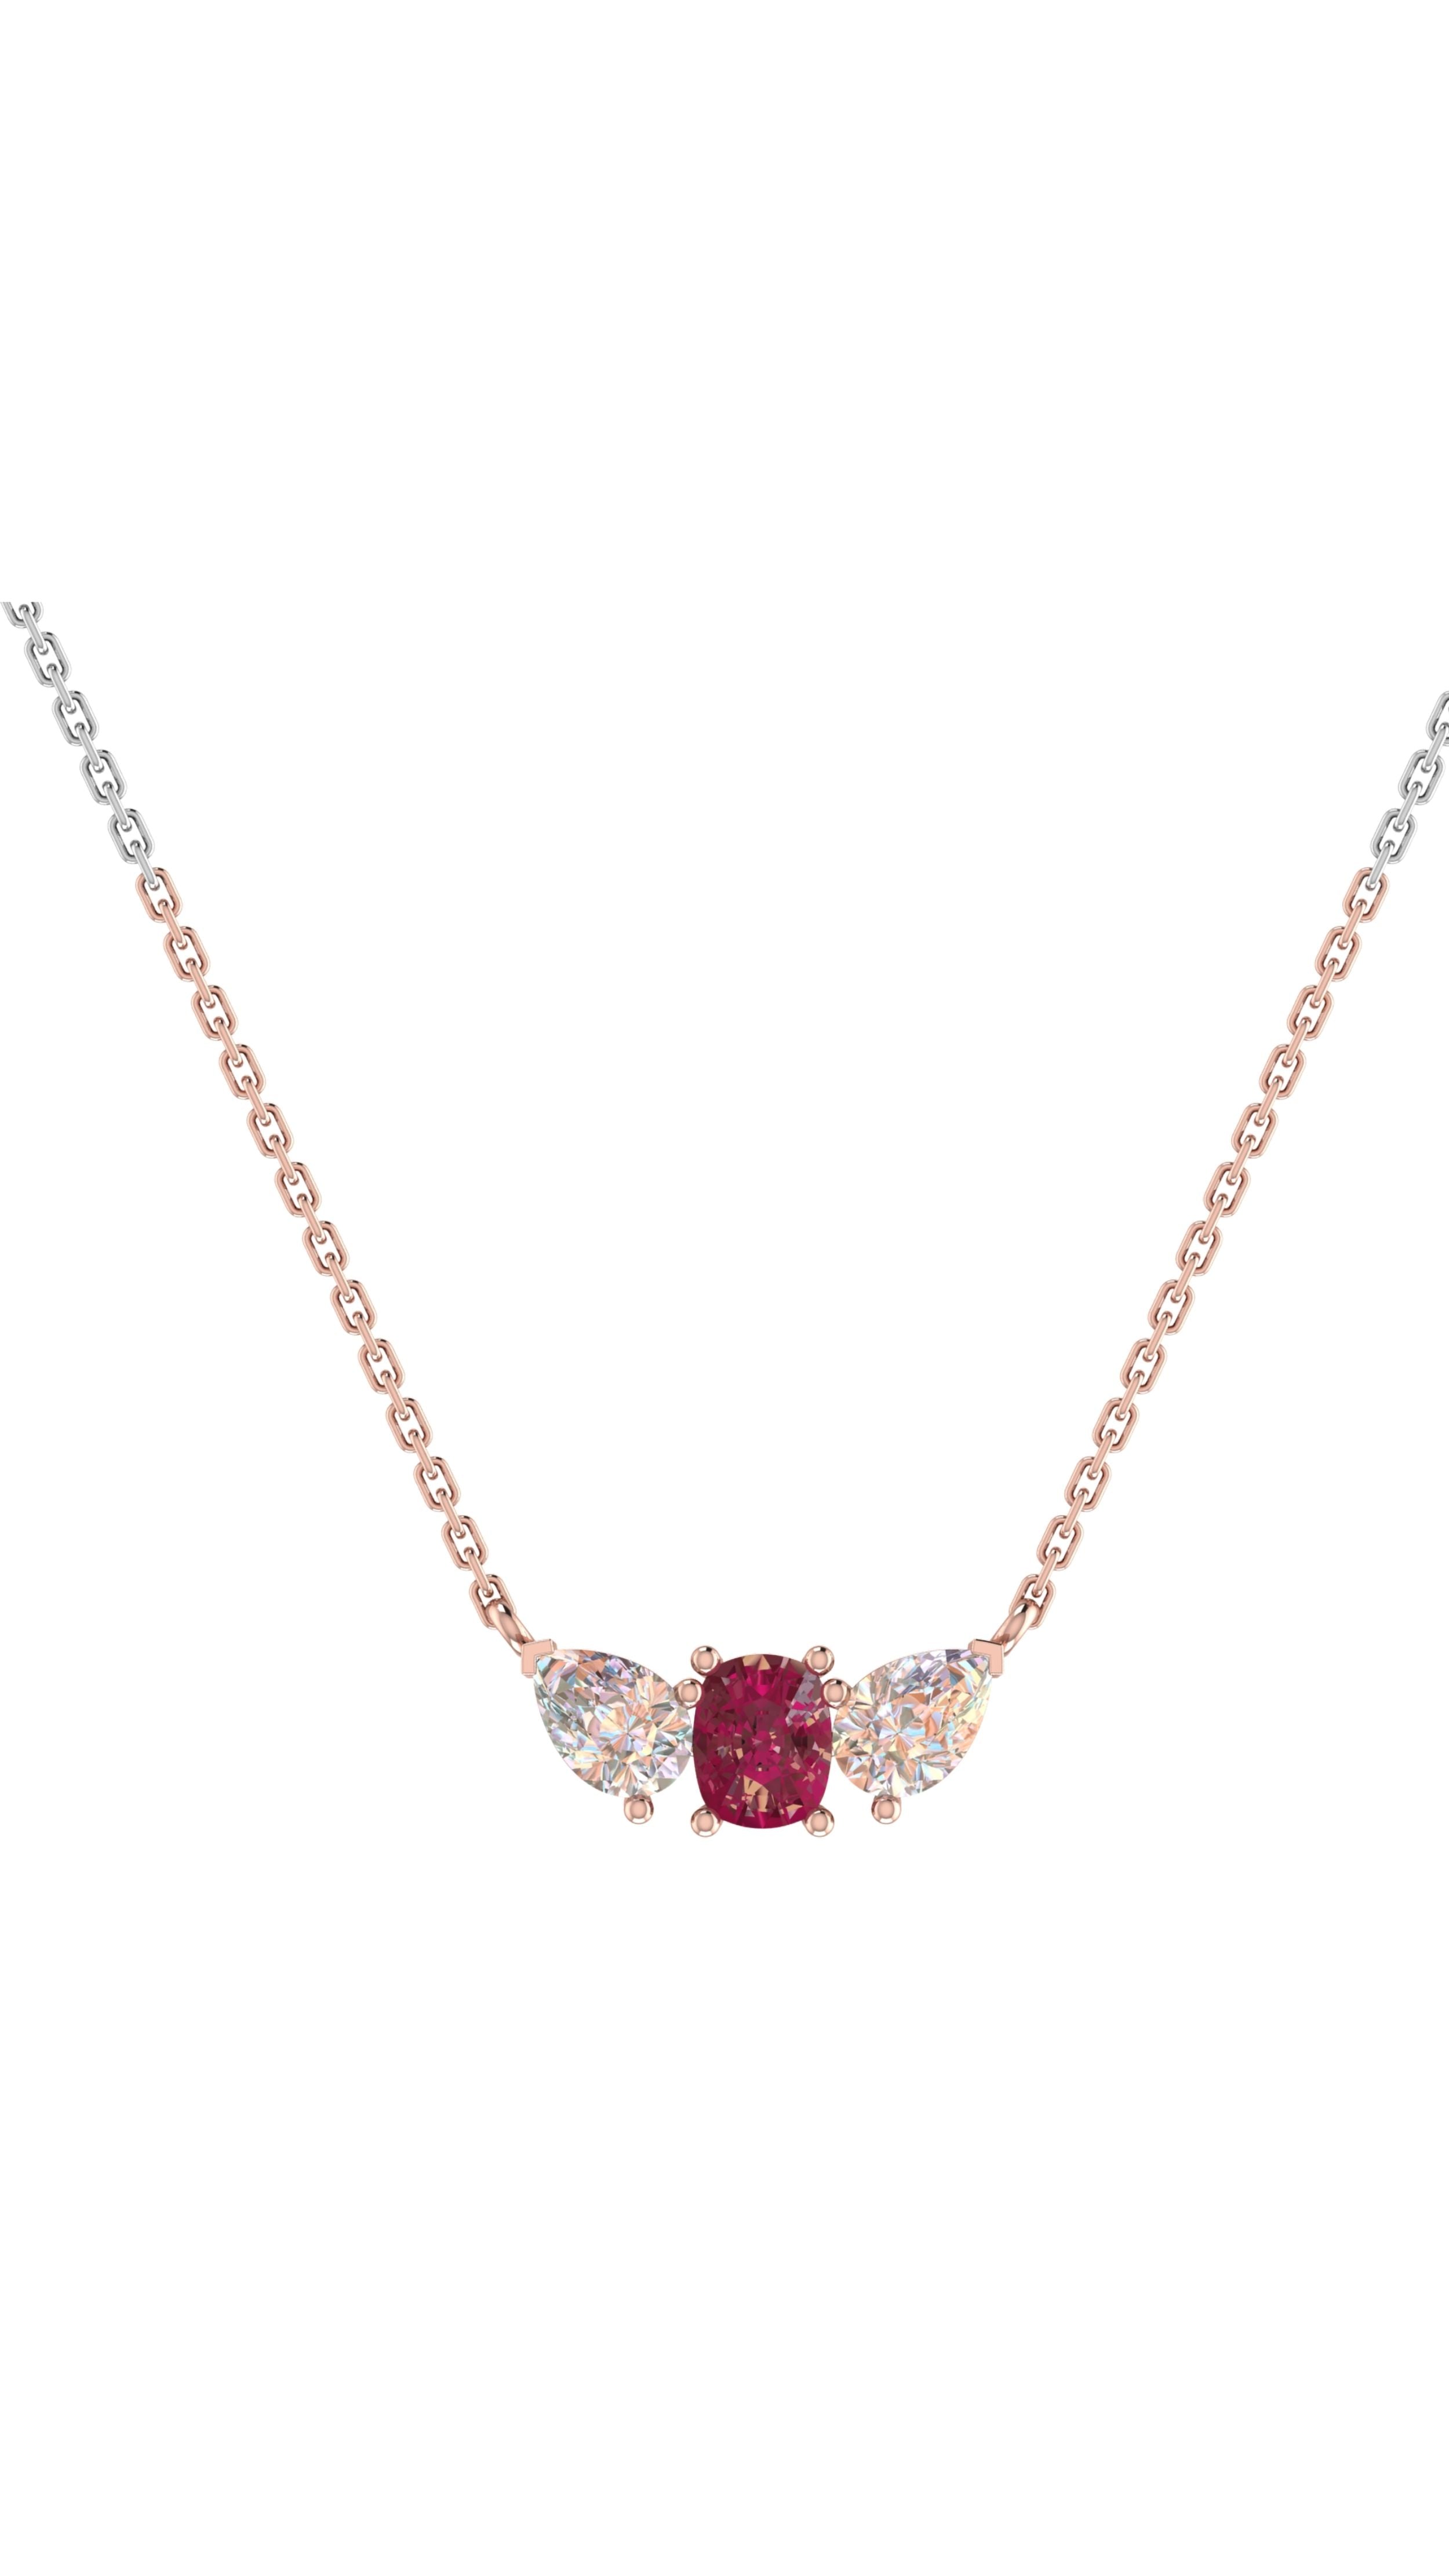 Conde de Diamante Ruby Pendant Necklace. Simple high jewelry necklace in platinum, 18K rose gold chain and with a single ruby surrounded by two white diamonds. 